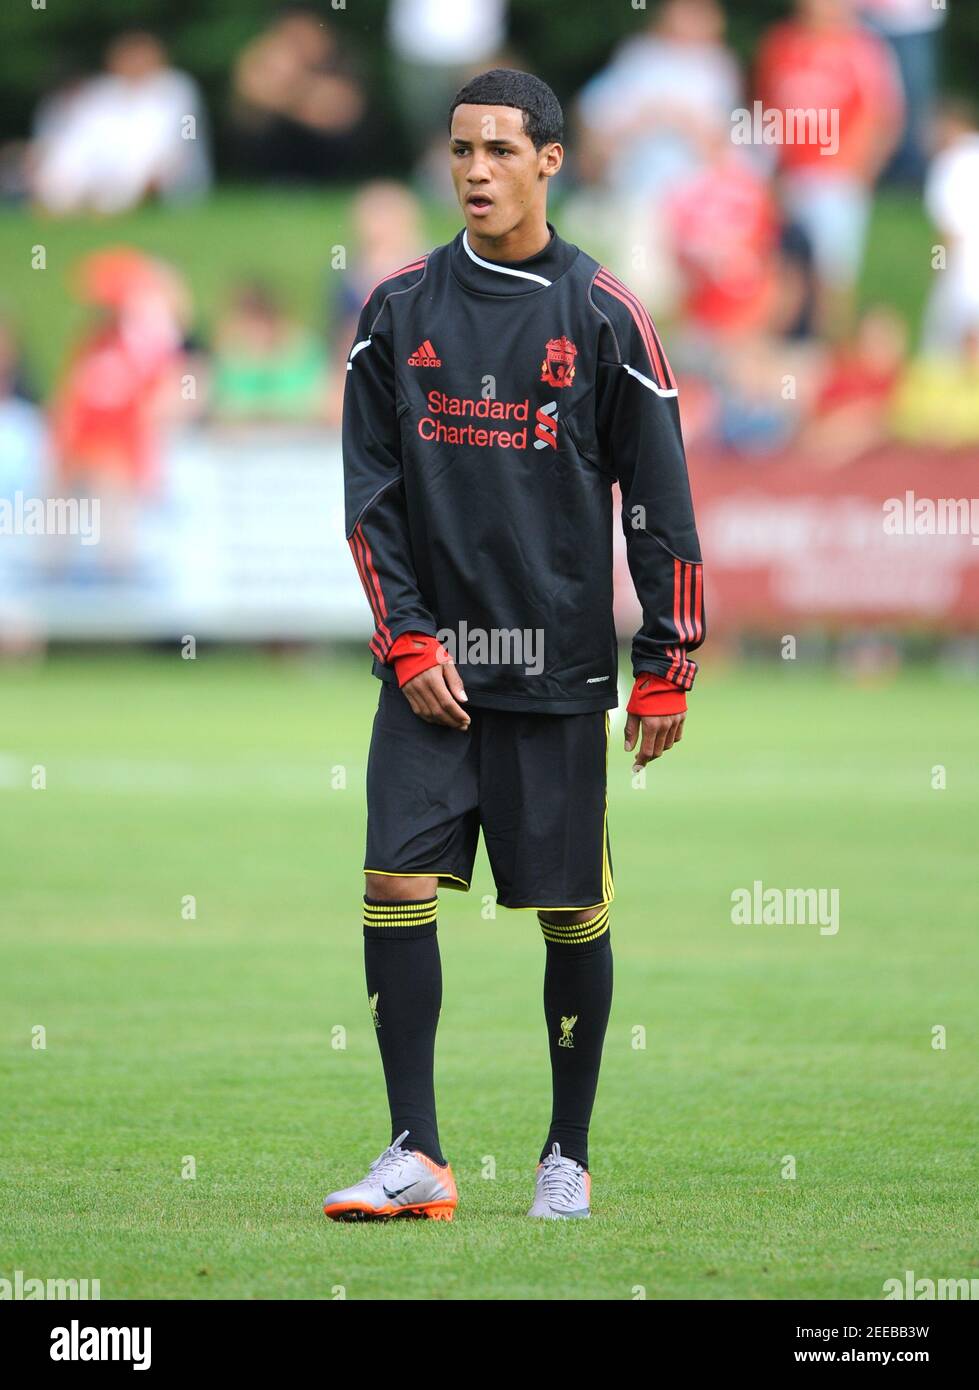 Football - Grasshopper Zurich v Liverpool - Pre Season Friendly - Herti  Stadion, Zug, Switzerland - 10/11 - 21/7/10 Thomas Ince - Liverpool warms  up Mandatory Credit: Action Images / Henry Browne Stock Photo - Alamy